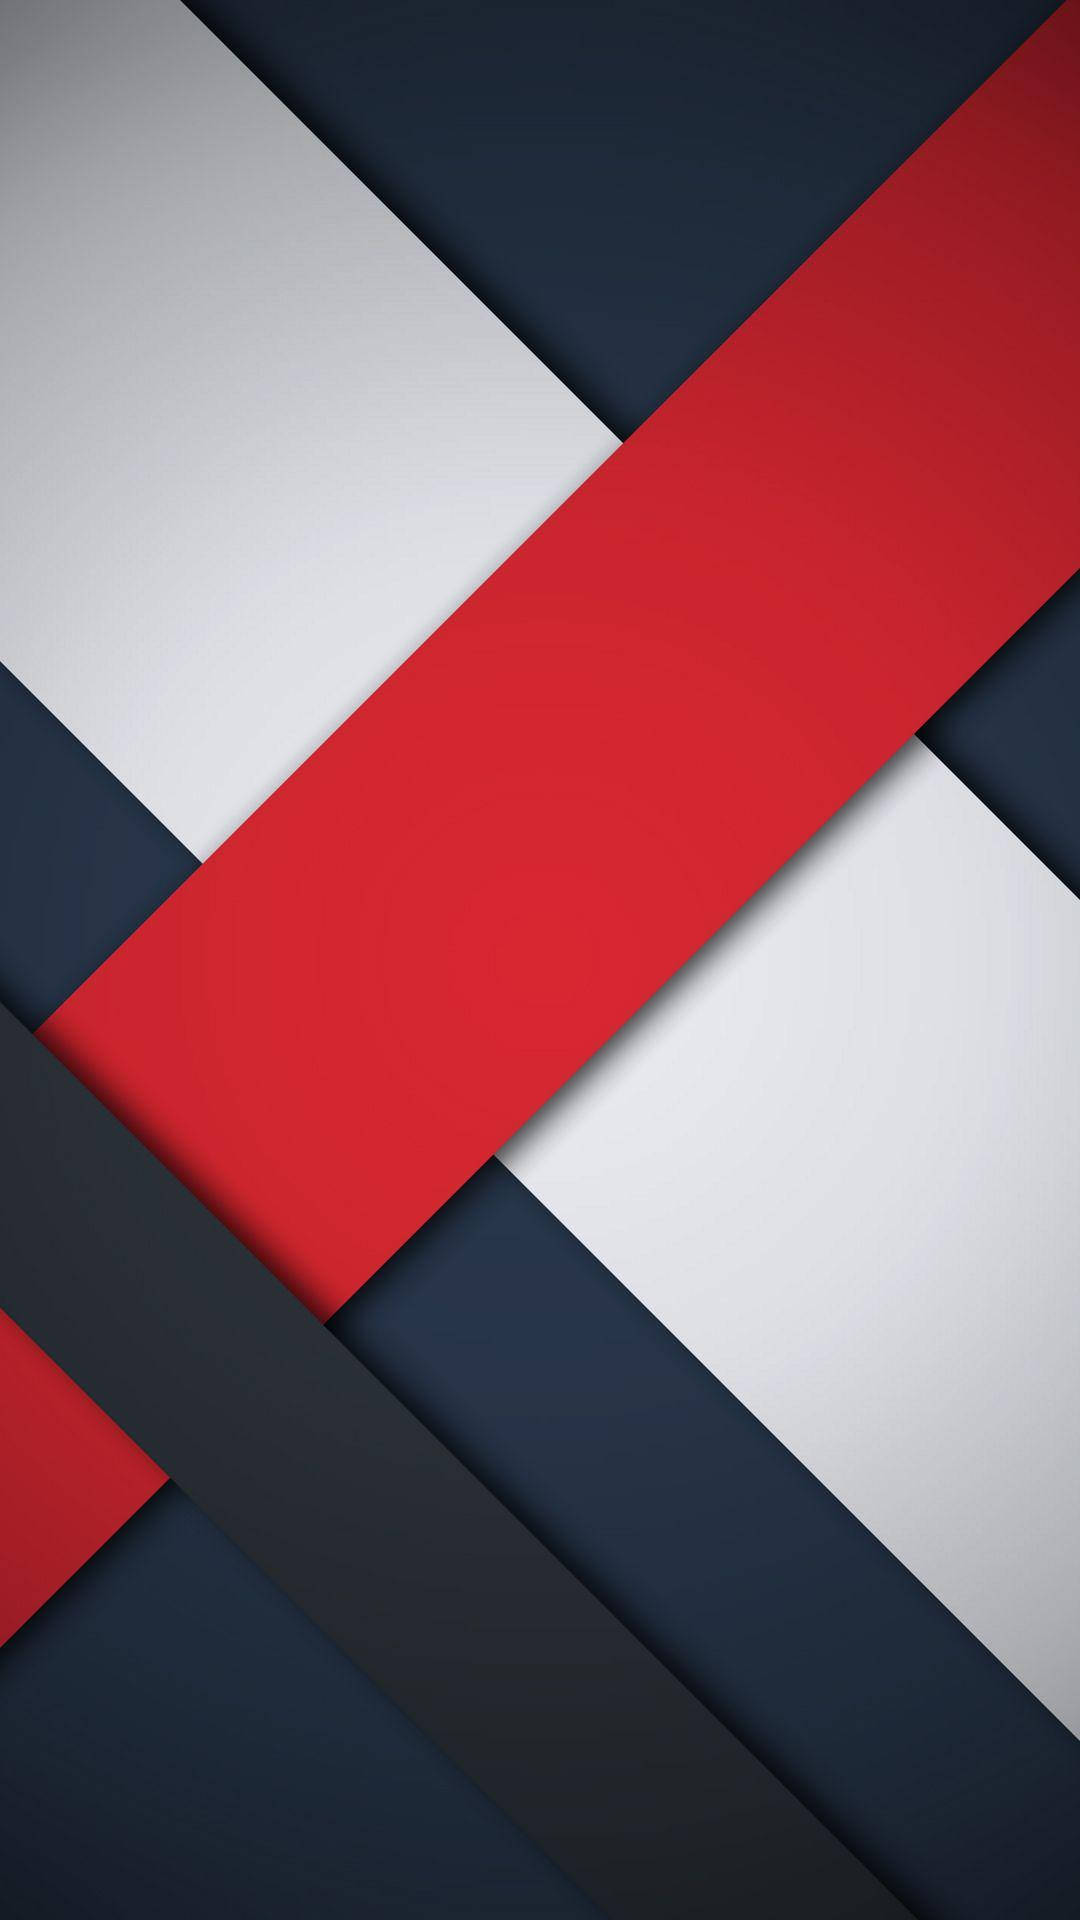 Abstract Red, White, And Blue Material Wallpaper